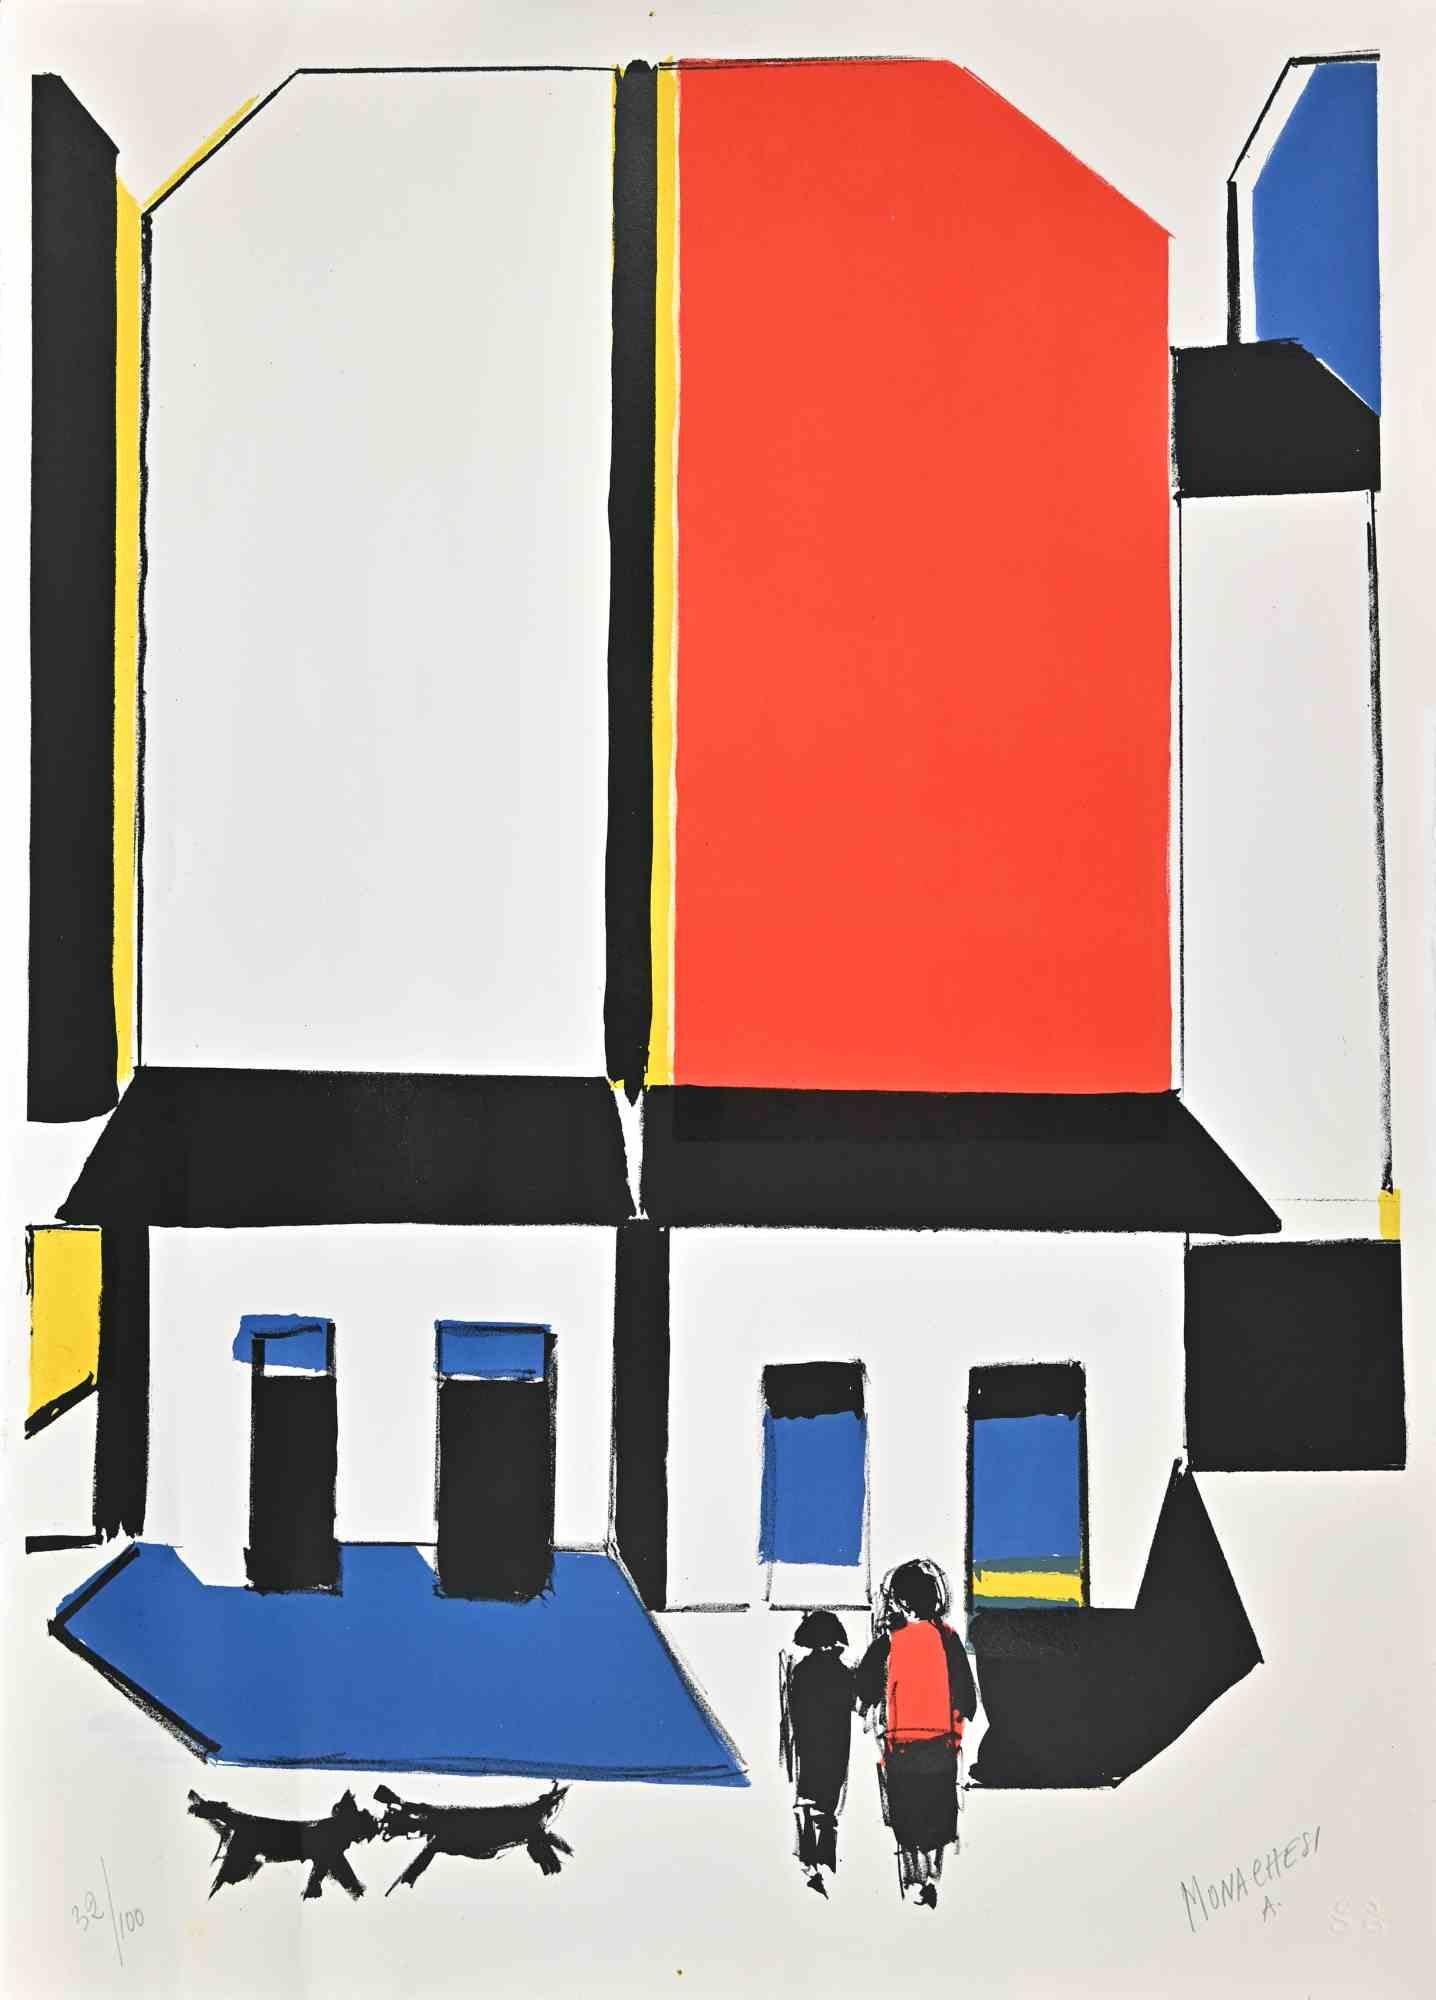 Blind Walls in Paris is a colored lithograph on paper realized by Sante Monachesi in 1975.

Hand-signed on the lower right by pencil.

Numbered on the lower left, the edition of 32/100 prints.

Title in Italian "Muri ciechi a Parigi".

Very good